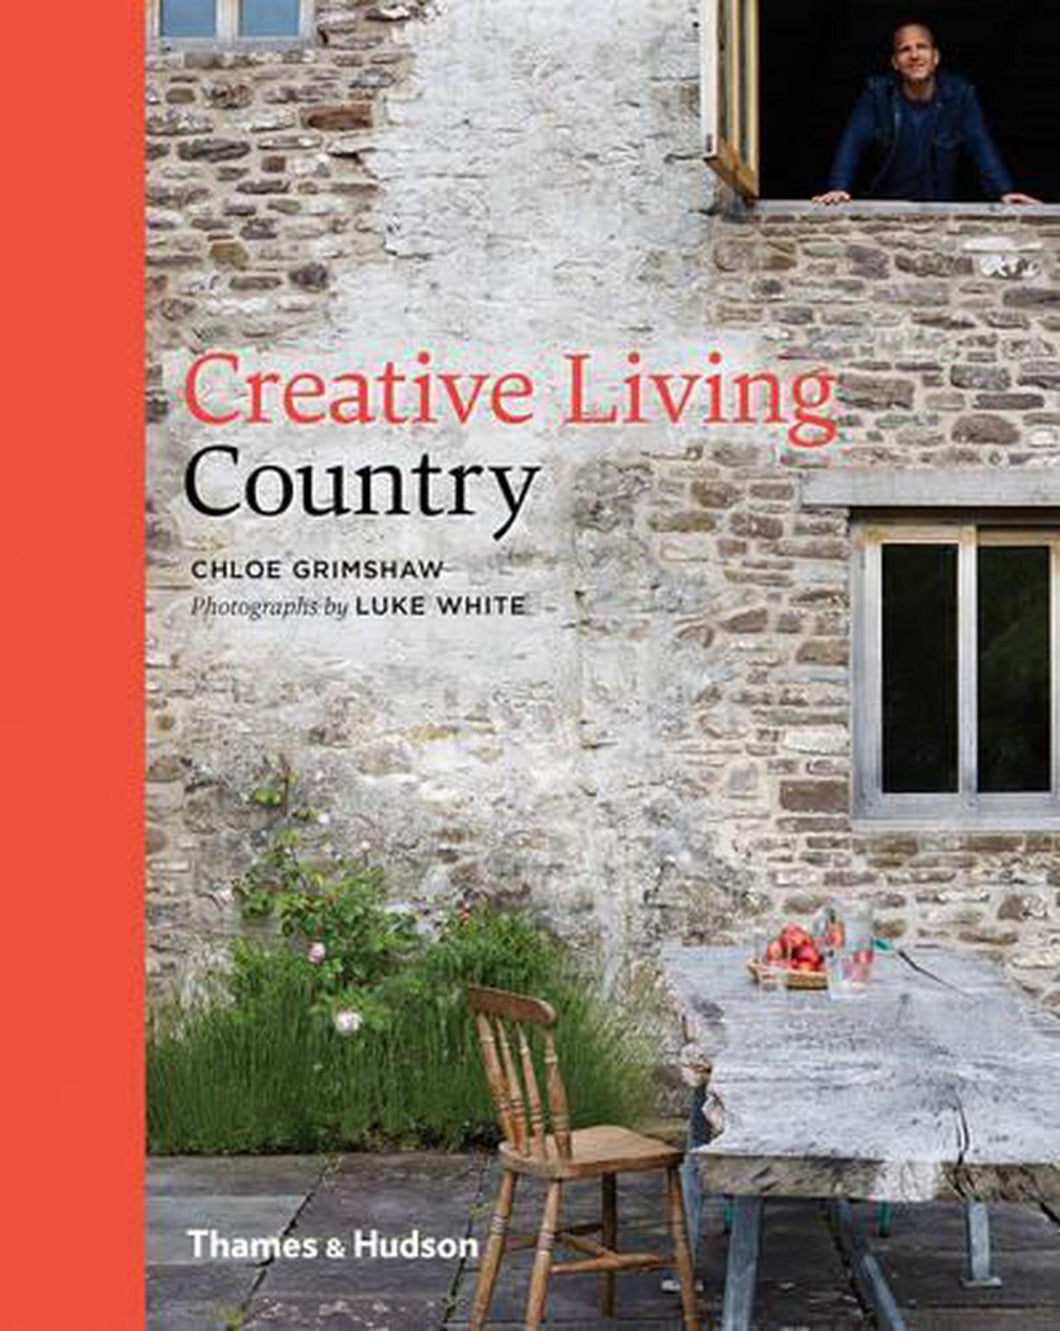 Creative Living Country by Chloe Grimshaw